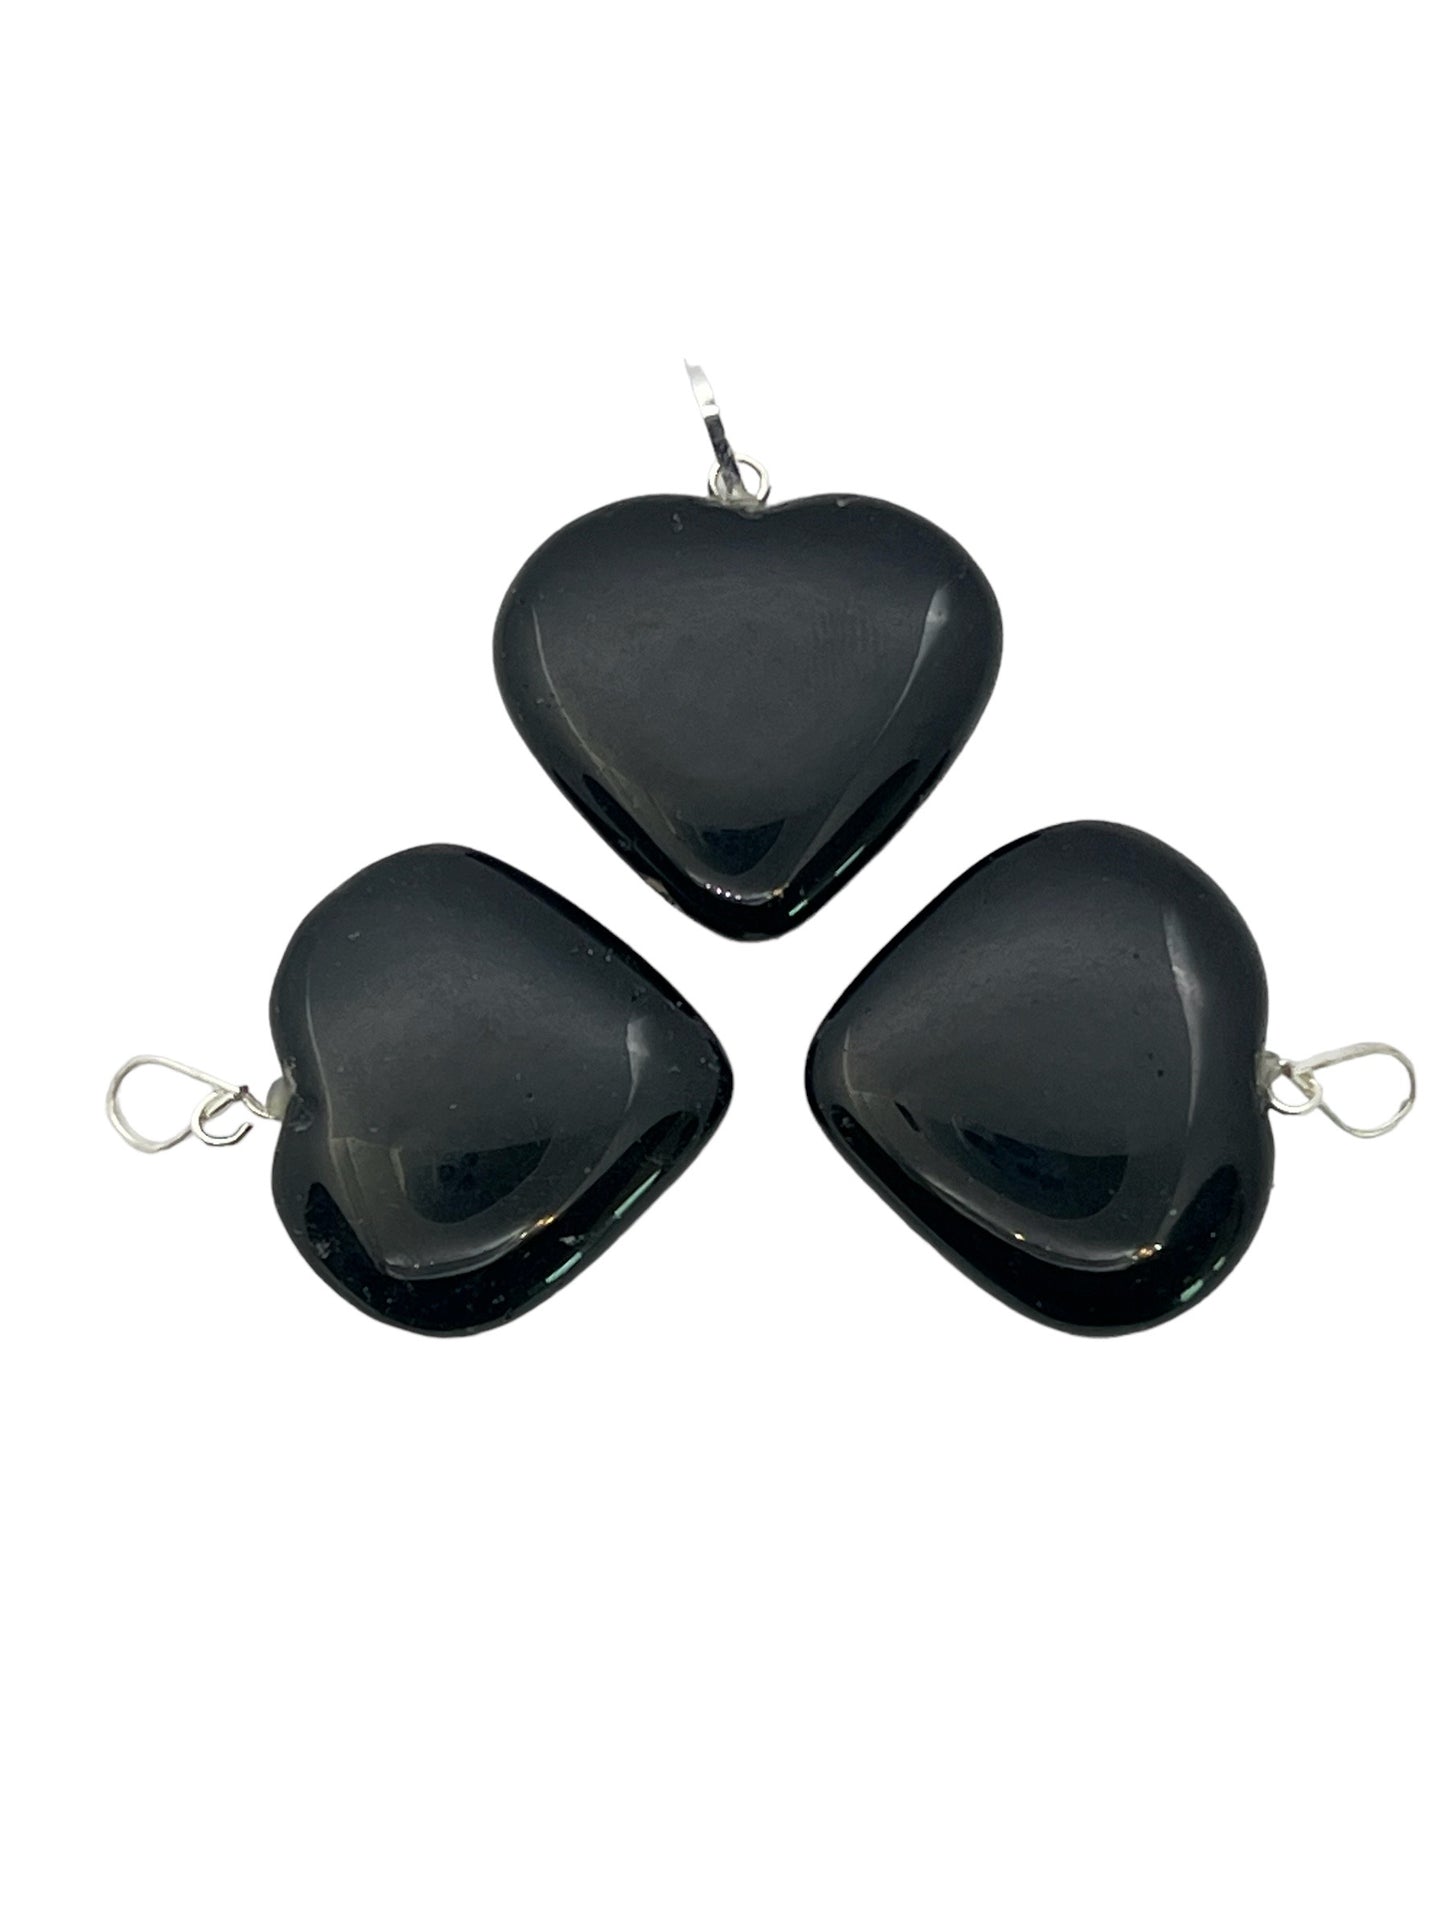 Puffy Heart-Shaped Pendant - Black Obsidian (12-Pack)